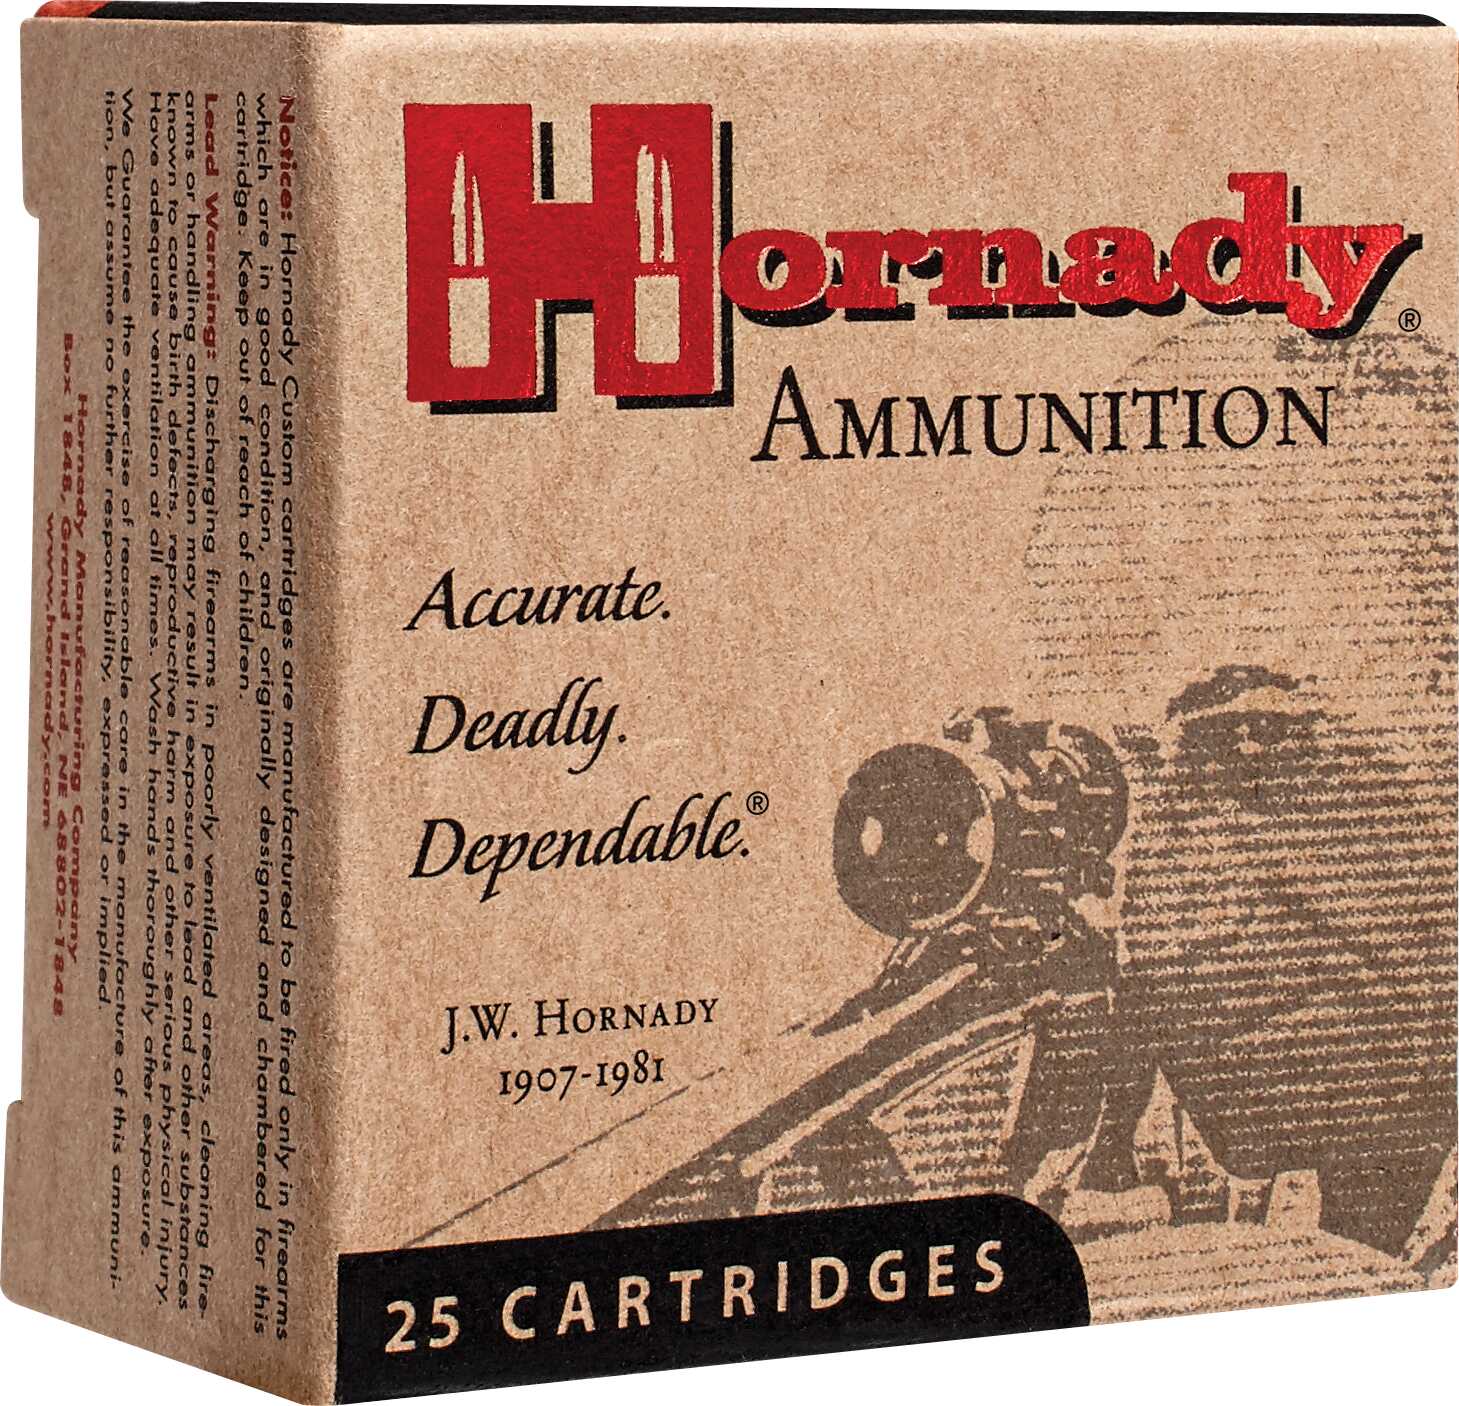 10mm 180 Grain Jacketed Hollow Point 20 Rounds Hornady Ammunition